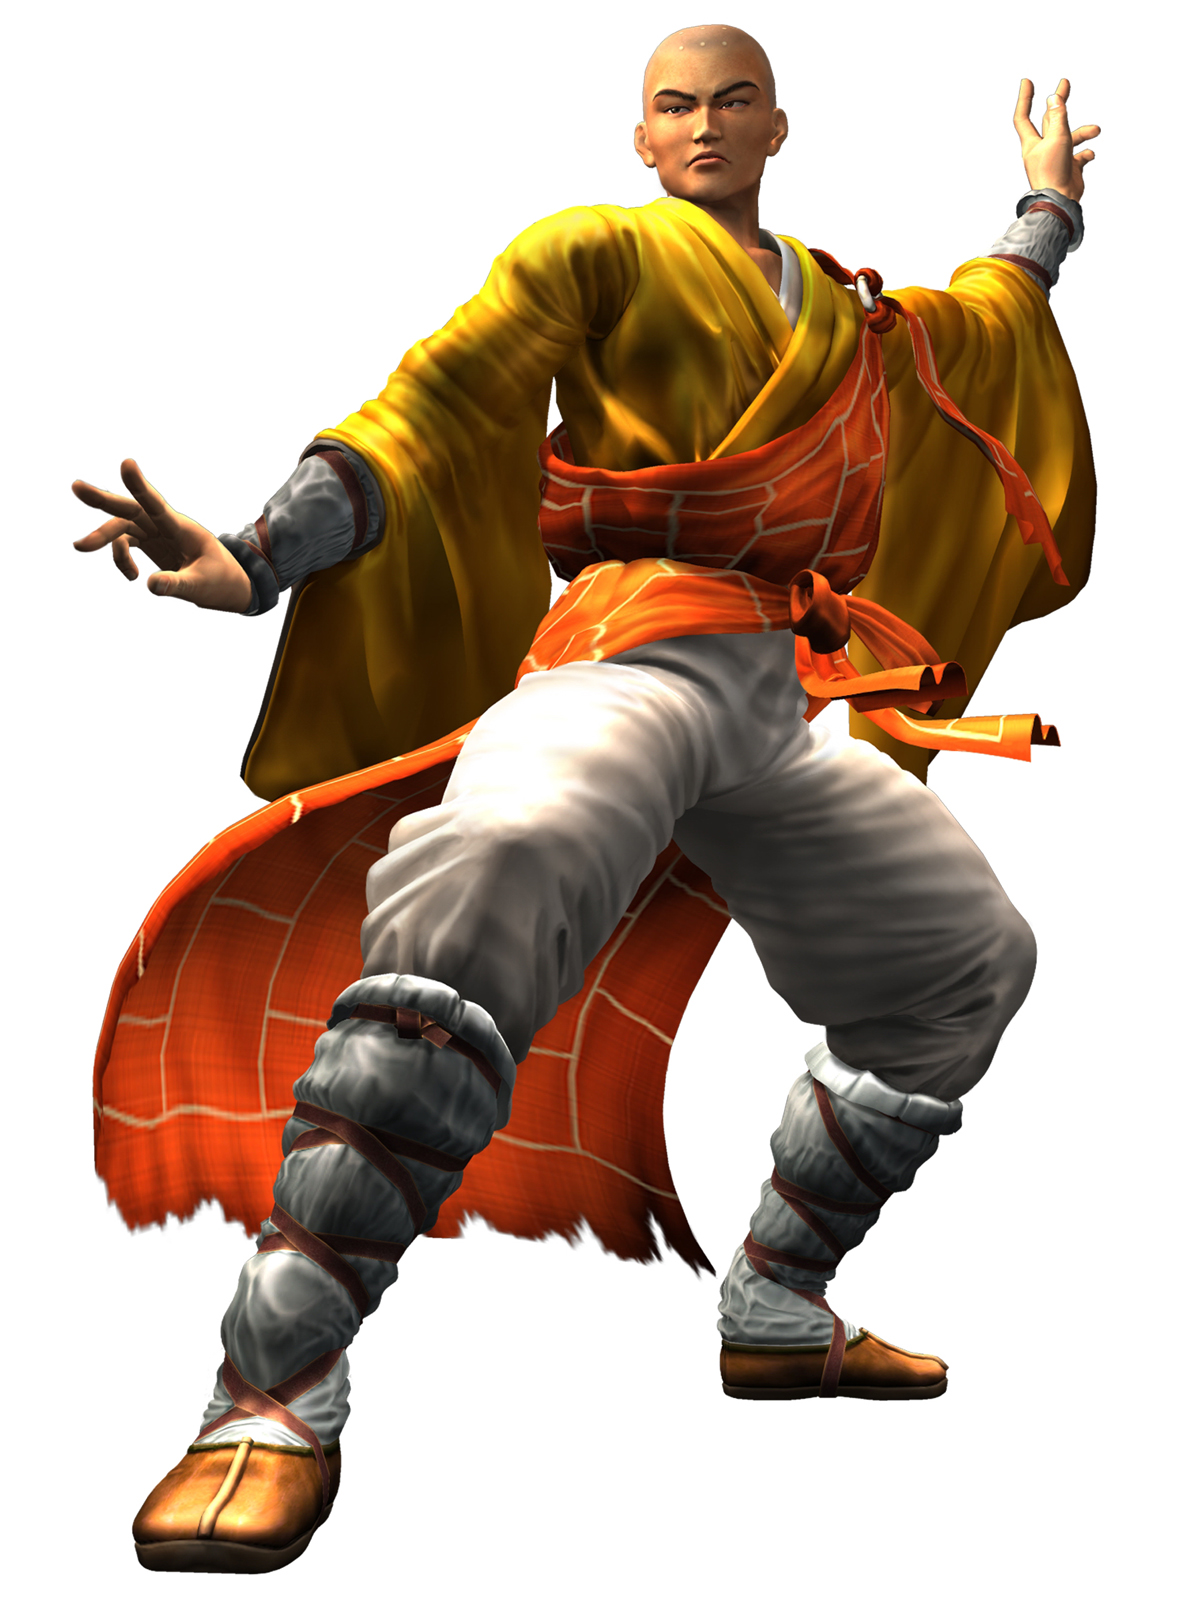 Images of Virtua Fighter 4 | 1200x1600